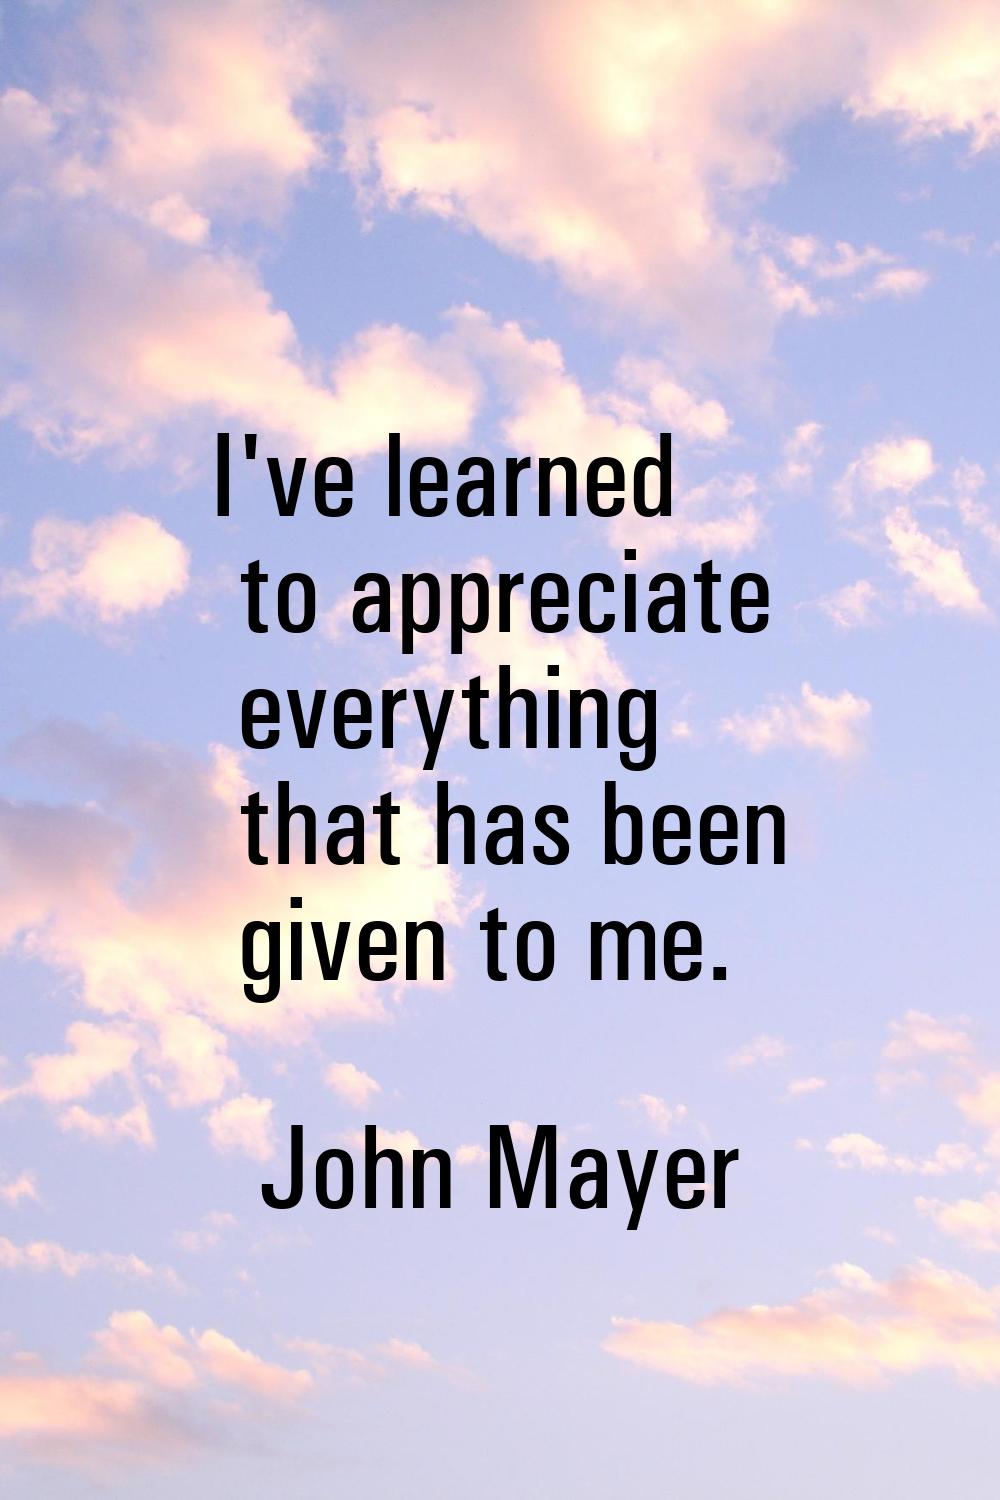 I've learned to appreciate everything that has been given to me.